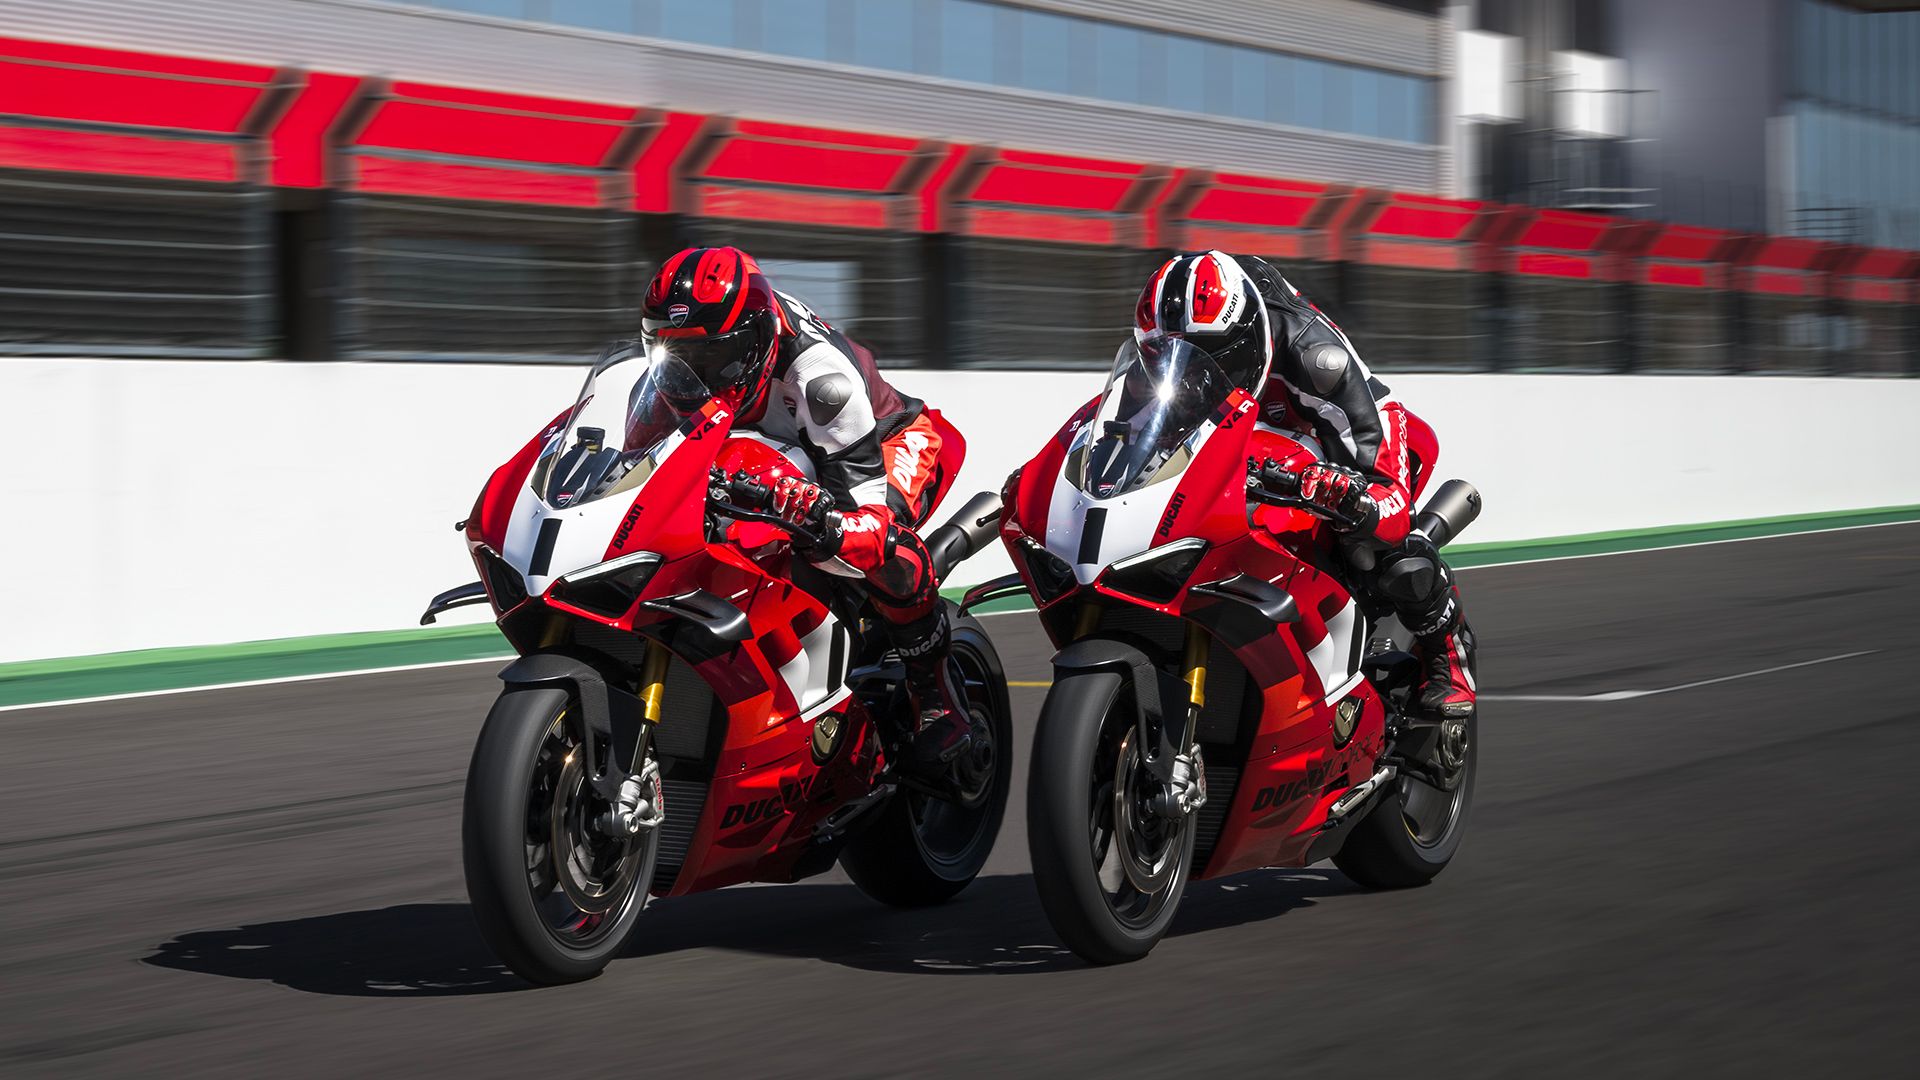 Ducati Panigale V4R supersport motorcycle